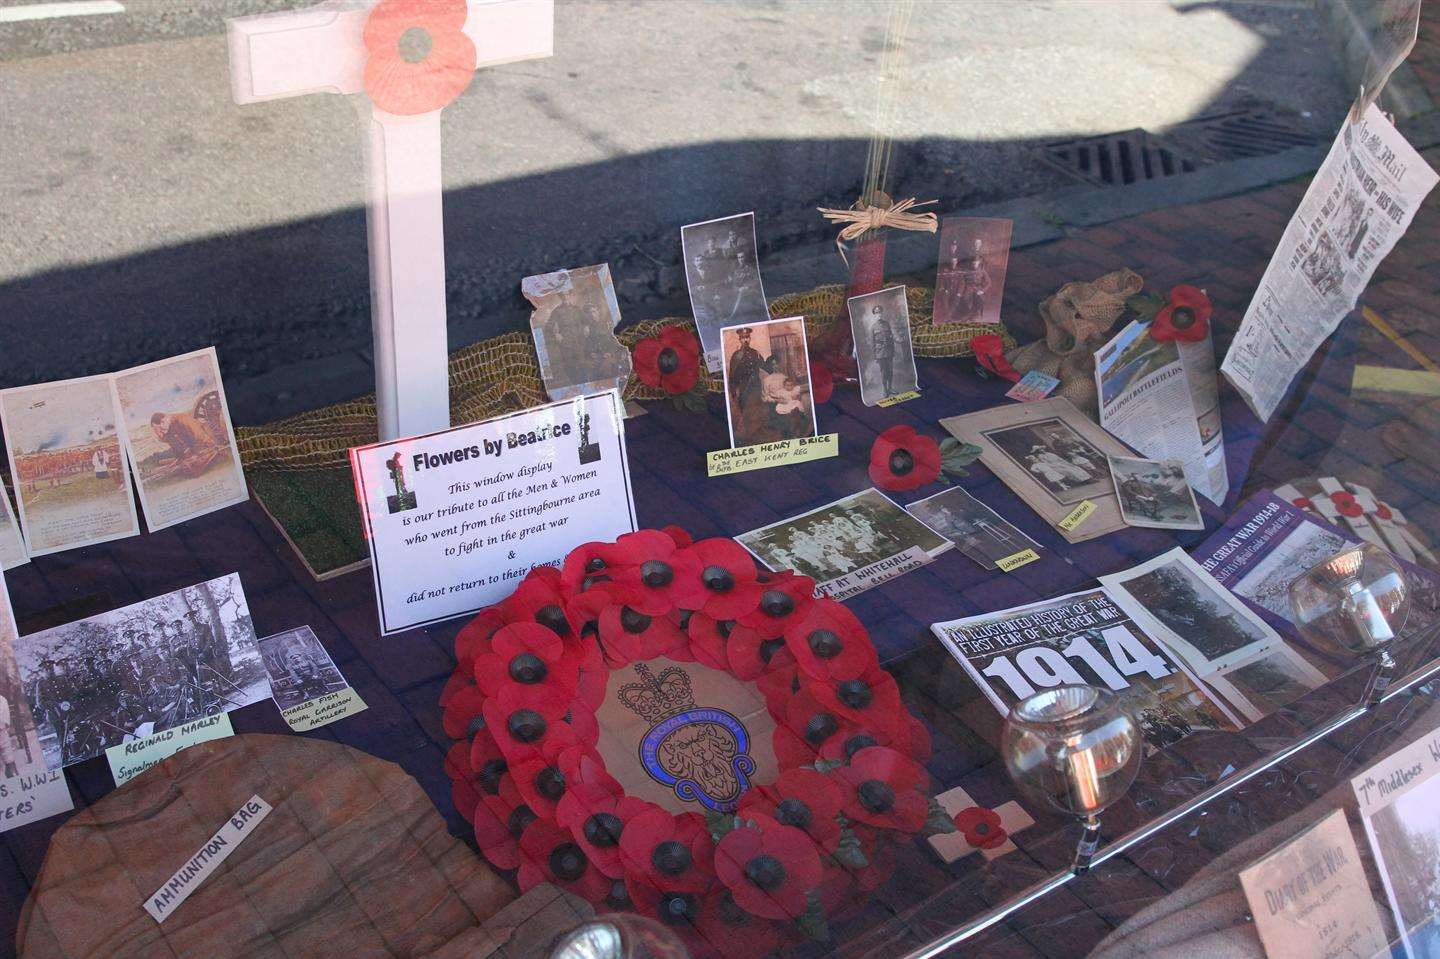 The tribute window display people can admire from the street